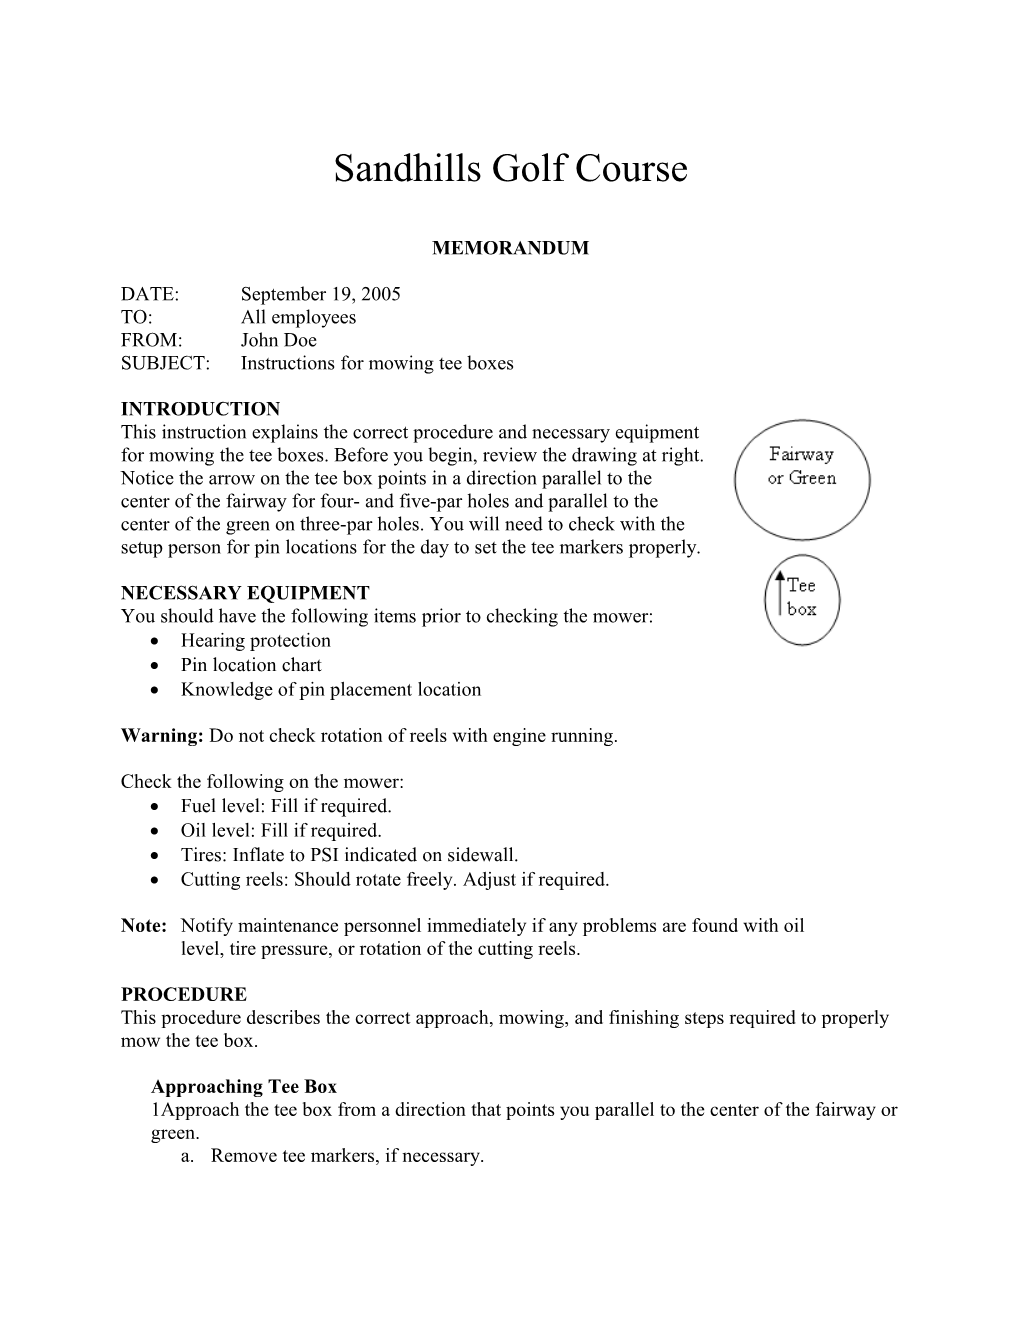 Instructions for Mowing Tee Boxes Page 2